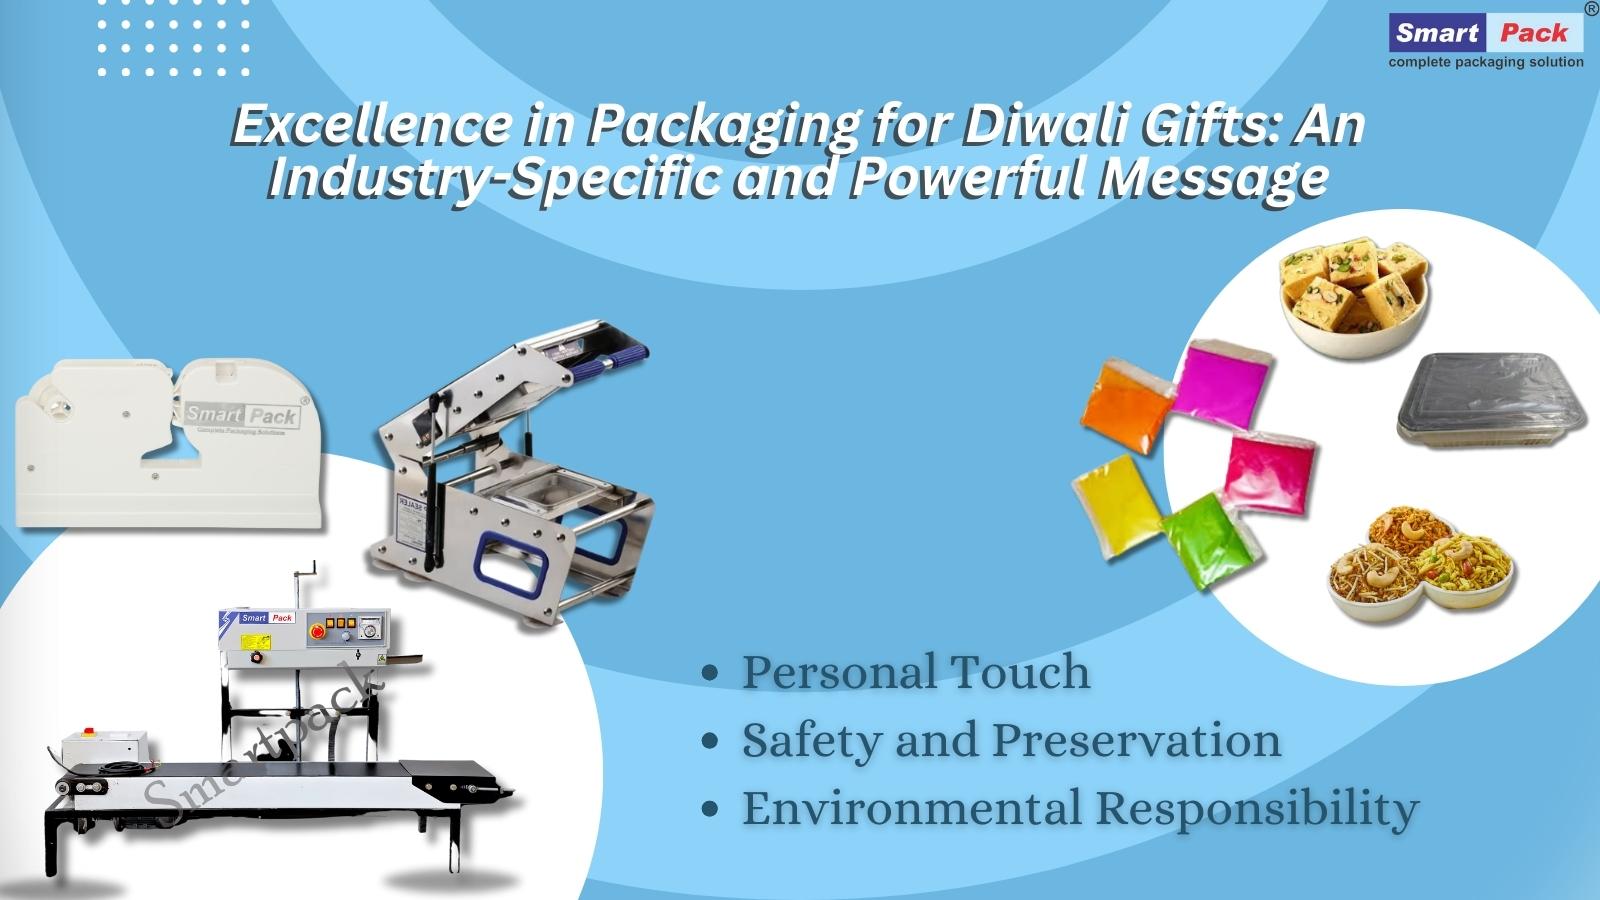 Excellence in Packaging for Diwali Gifts: An Industry-Specific and Powerful Message